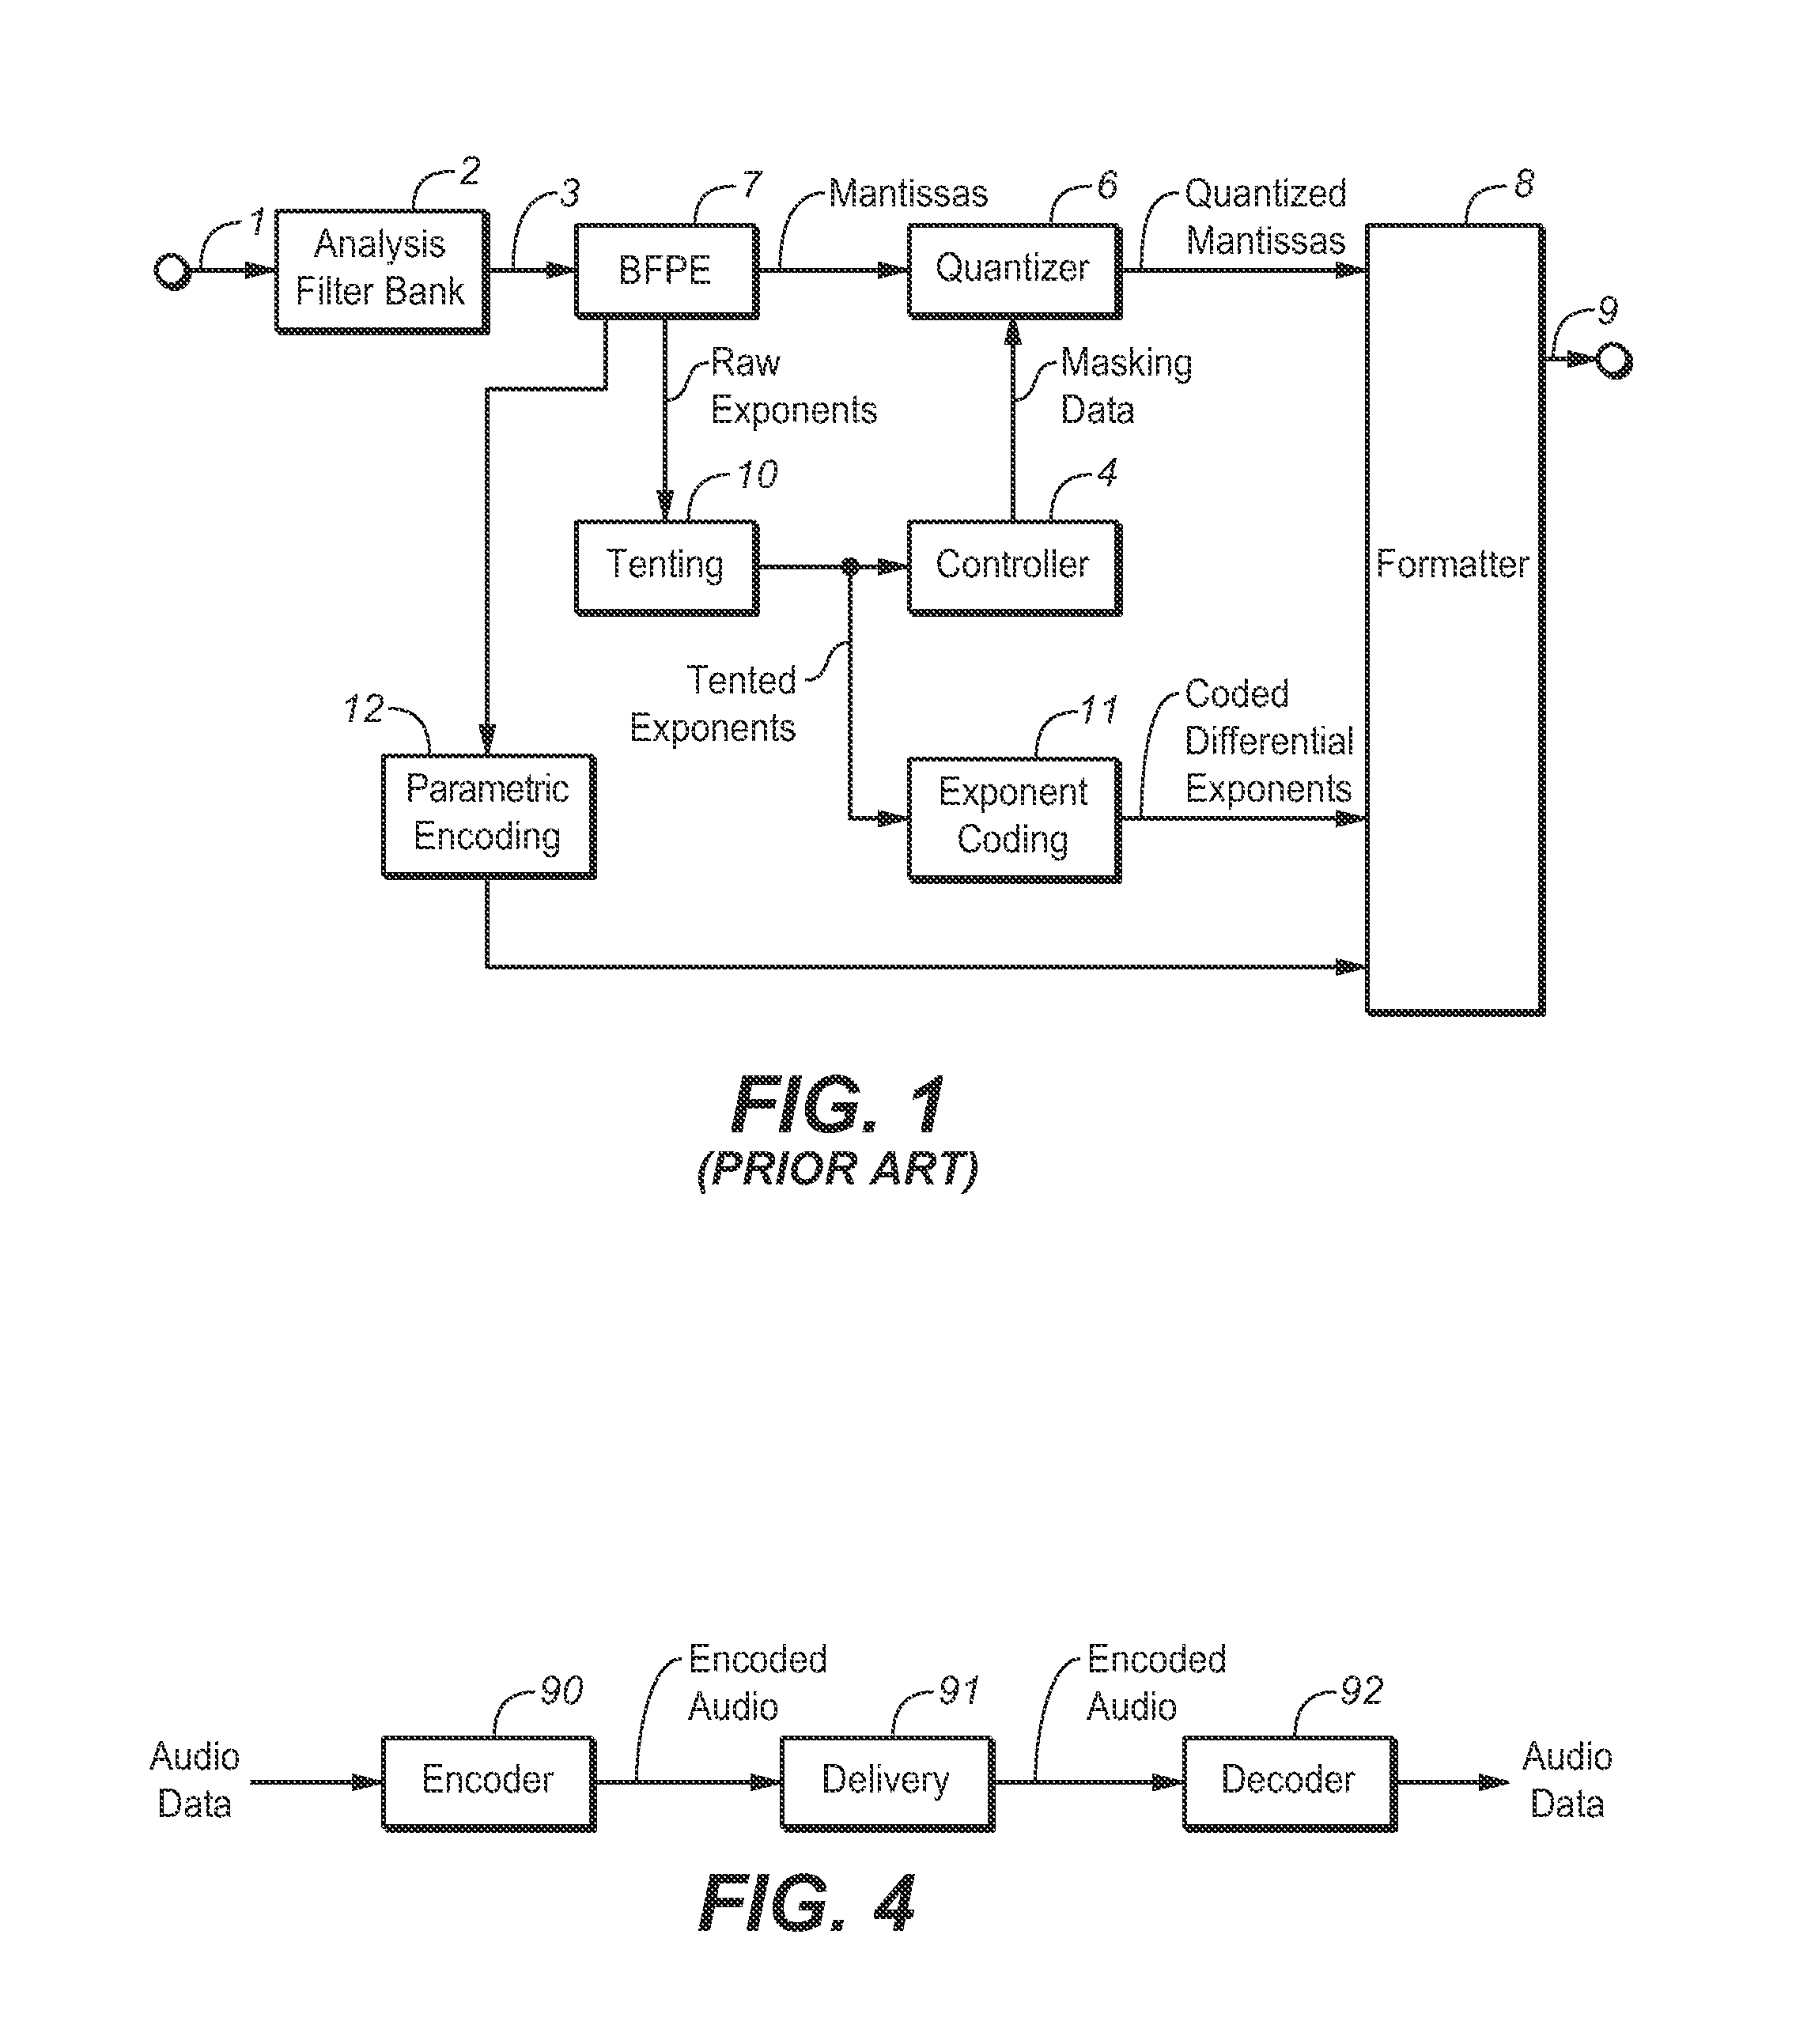 Hybrid encoding of higher frequency and downmixed low frequency content of multichannel audio